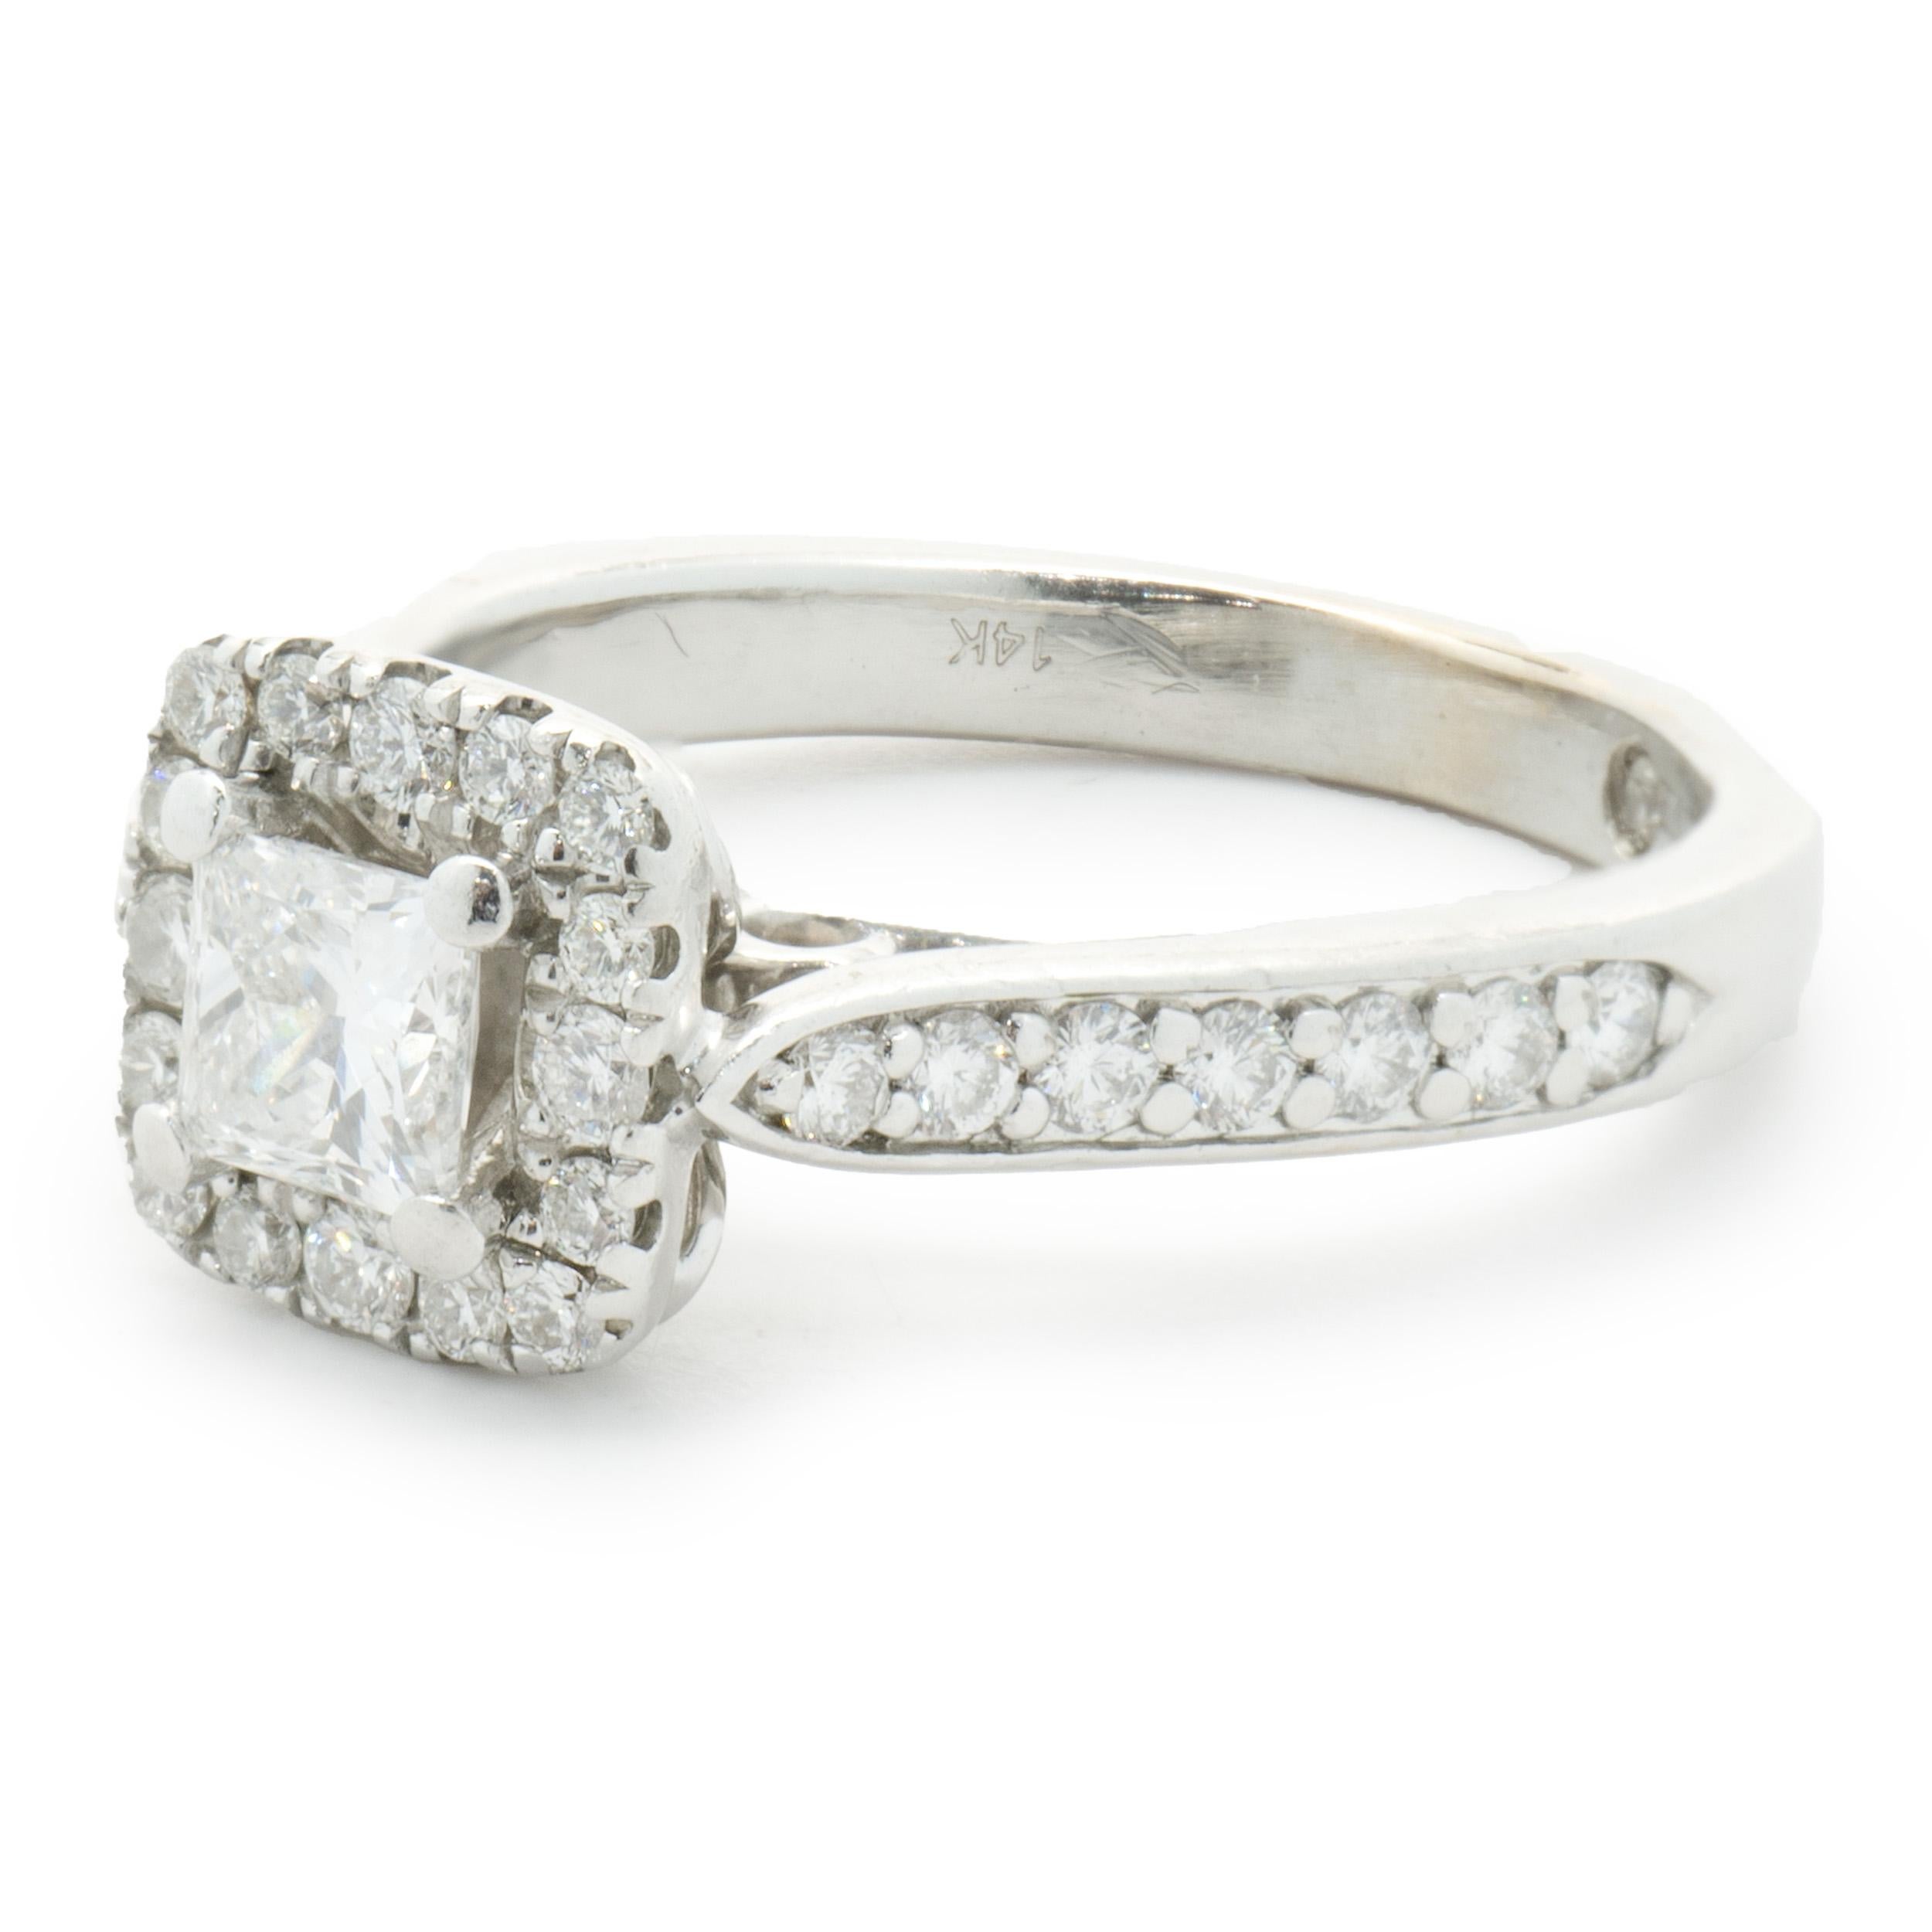 Designer: Custom
Material: 14K white gold
Diamond: 1 princess cut= 0.40ct
Color: I
Clarity: SI1
Diamond: 30 round brilliant cut= 0.45cttw
Color: H
Clarity: SI1
Dimensions: ring top measures 8mm wide
Ring Size: 4.75 (complimentary sizing